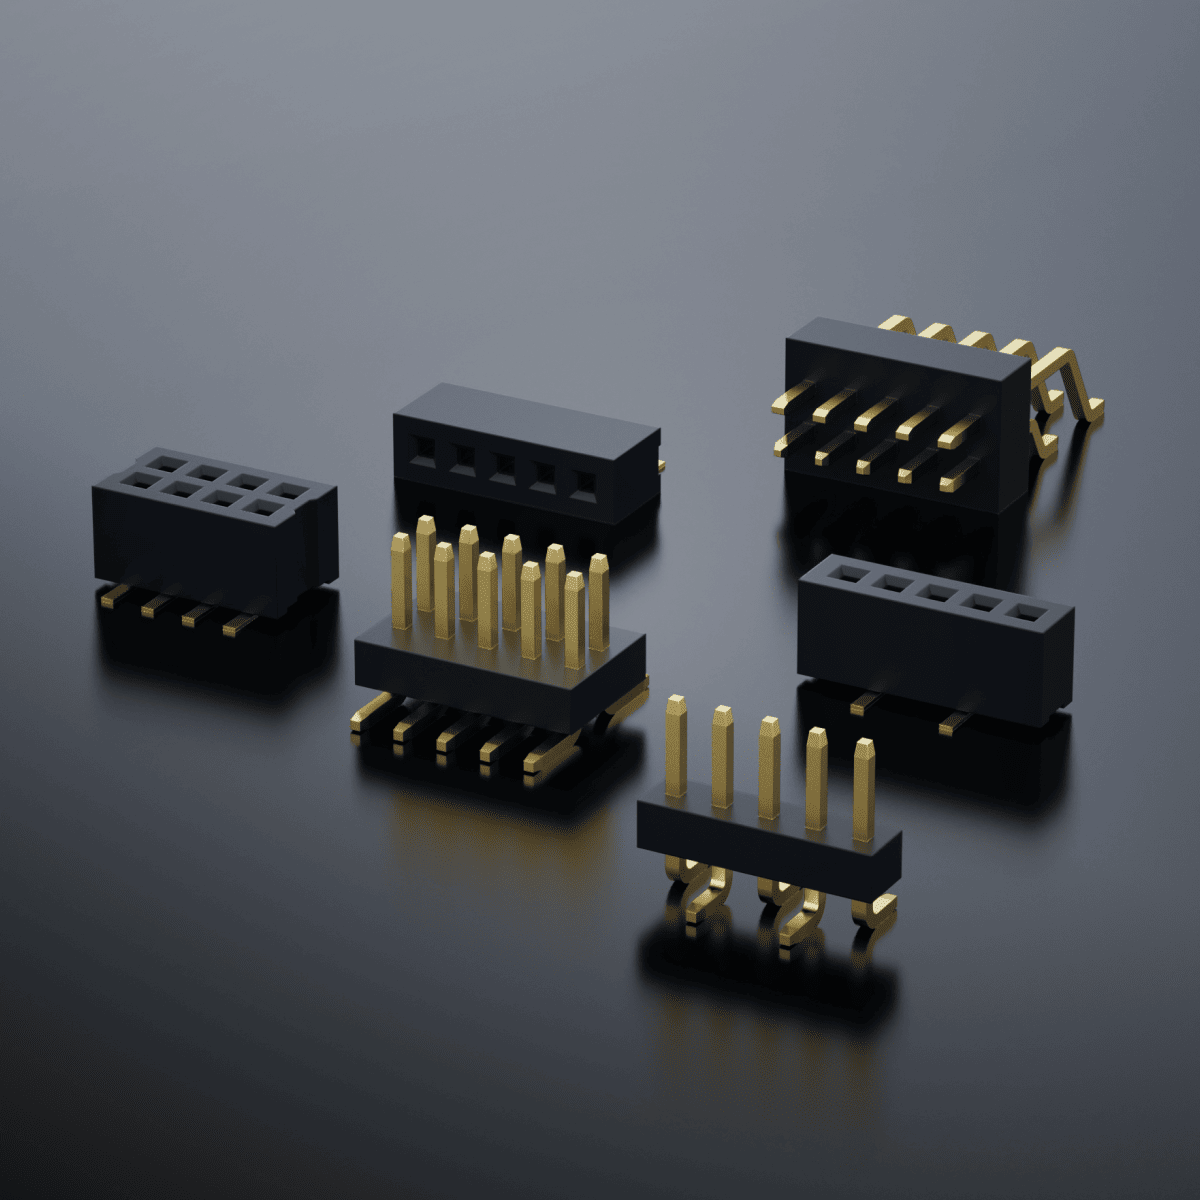 Ultra-Compact 1mm Pitch Headers and Sockets for Compact Designs